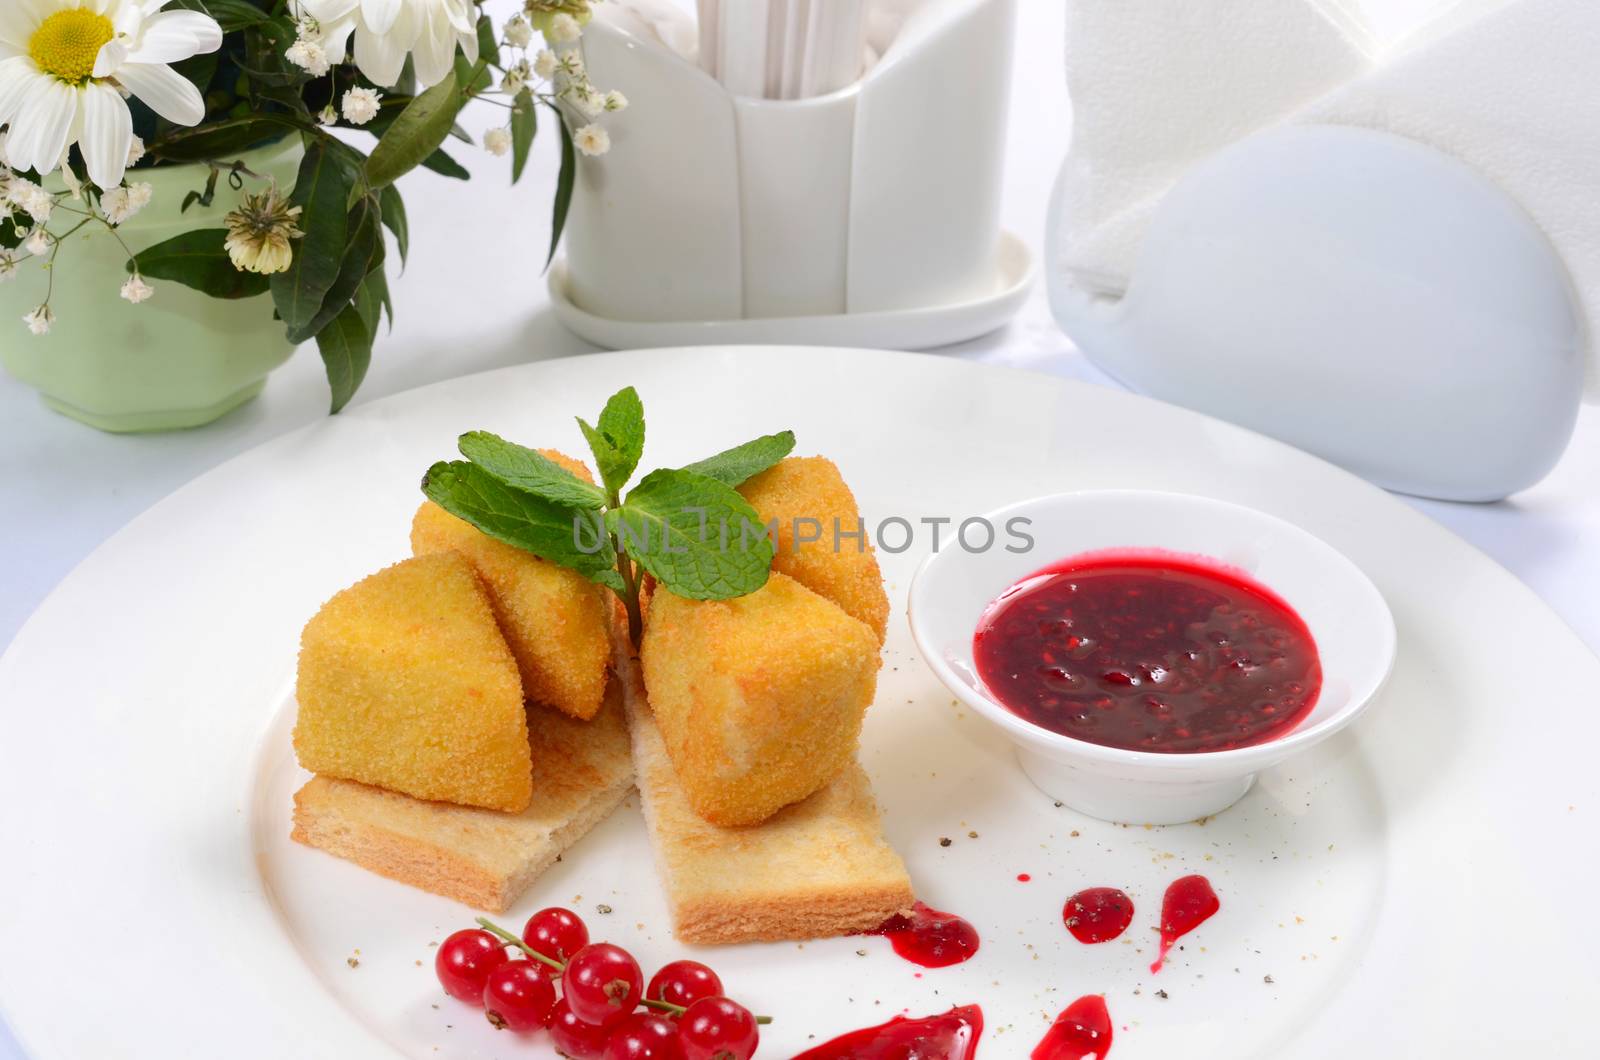 The cheese in breadcrumbs with currant jam